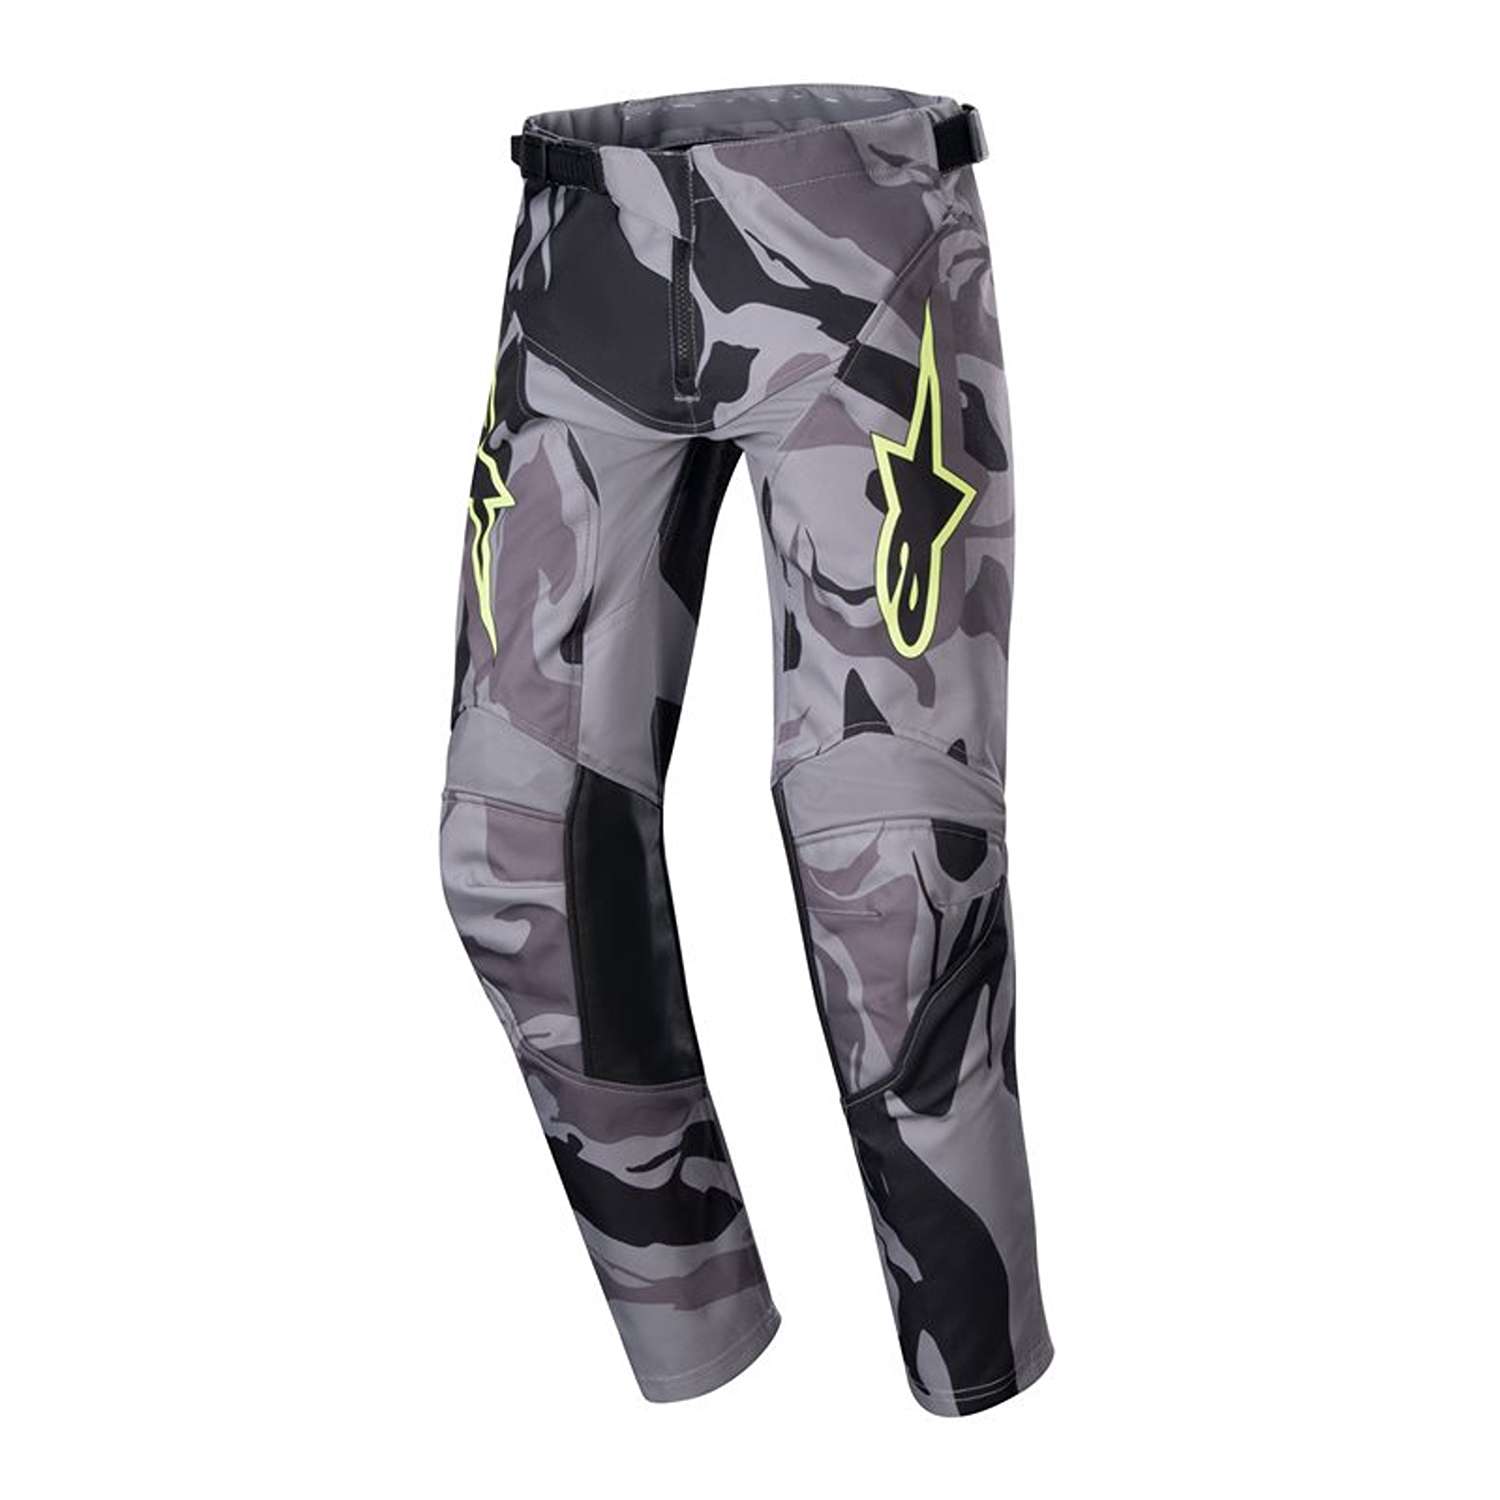 Image of Alpinestars Youth Racer Tactical Pants Cast Gray Camo Magnet Taille 22